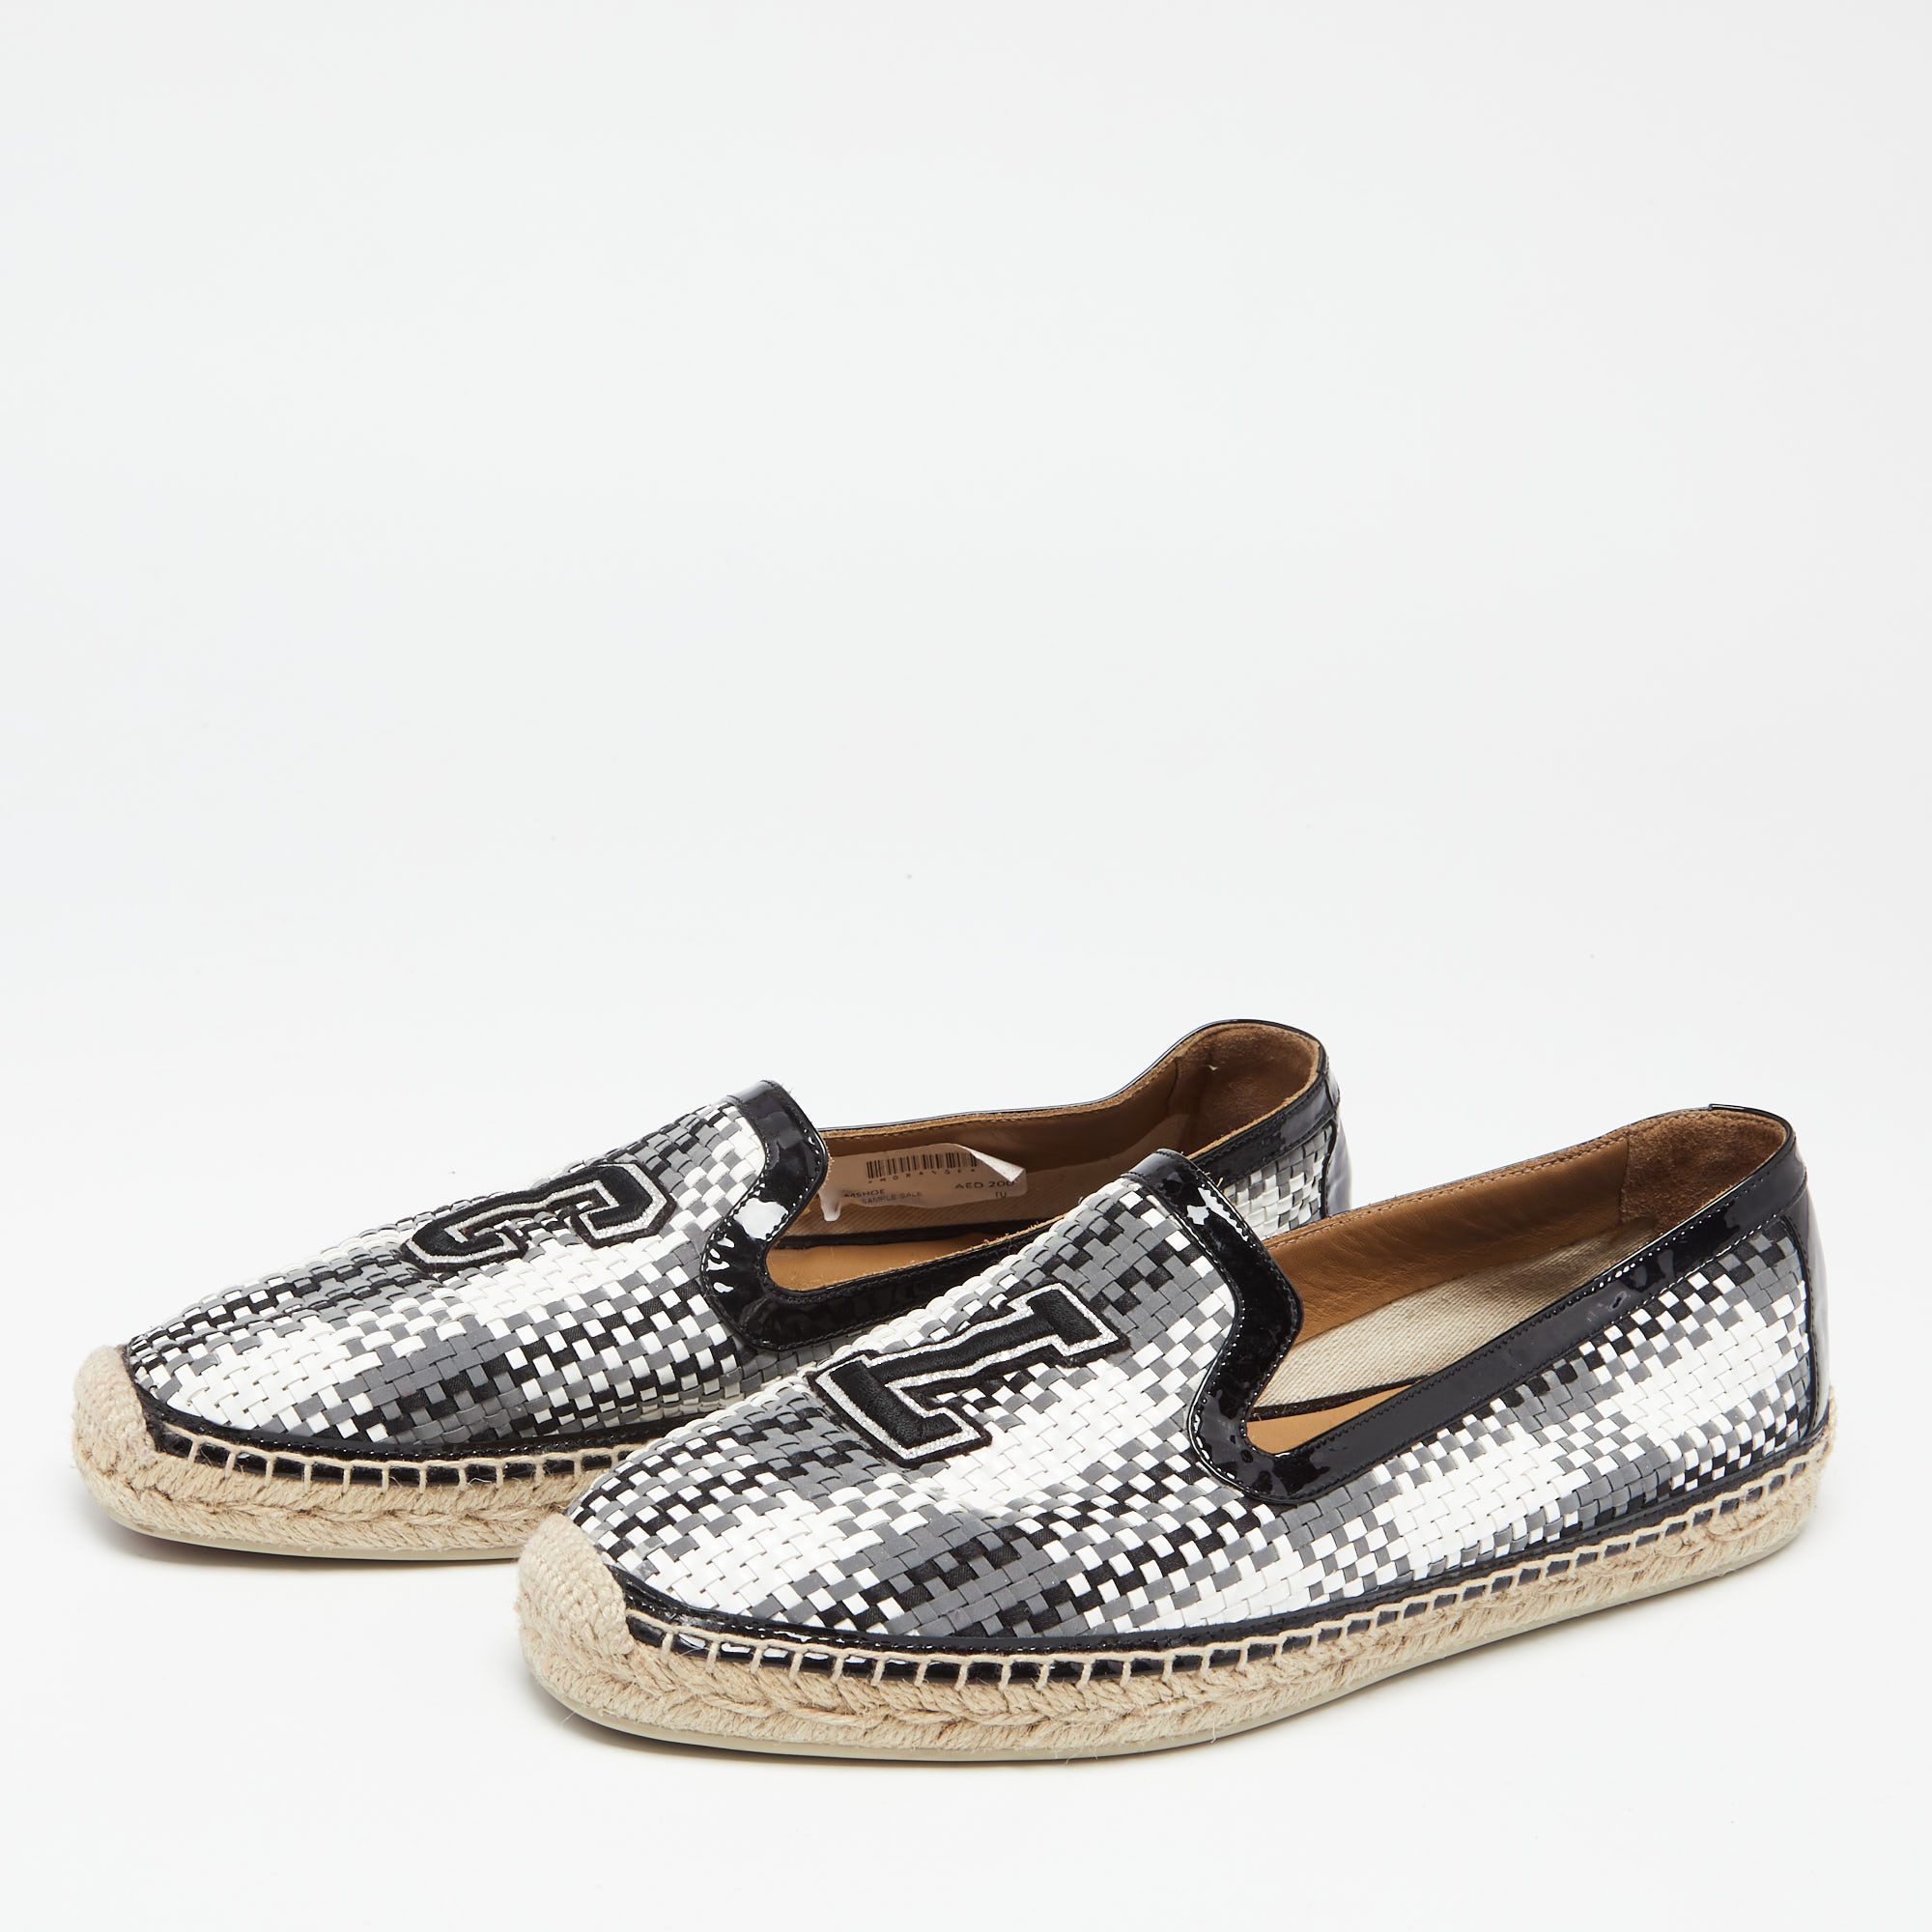 

Christian Louboutin Tricolor Woven Leather And Patent Espadrilles Loafers Size, Black